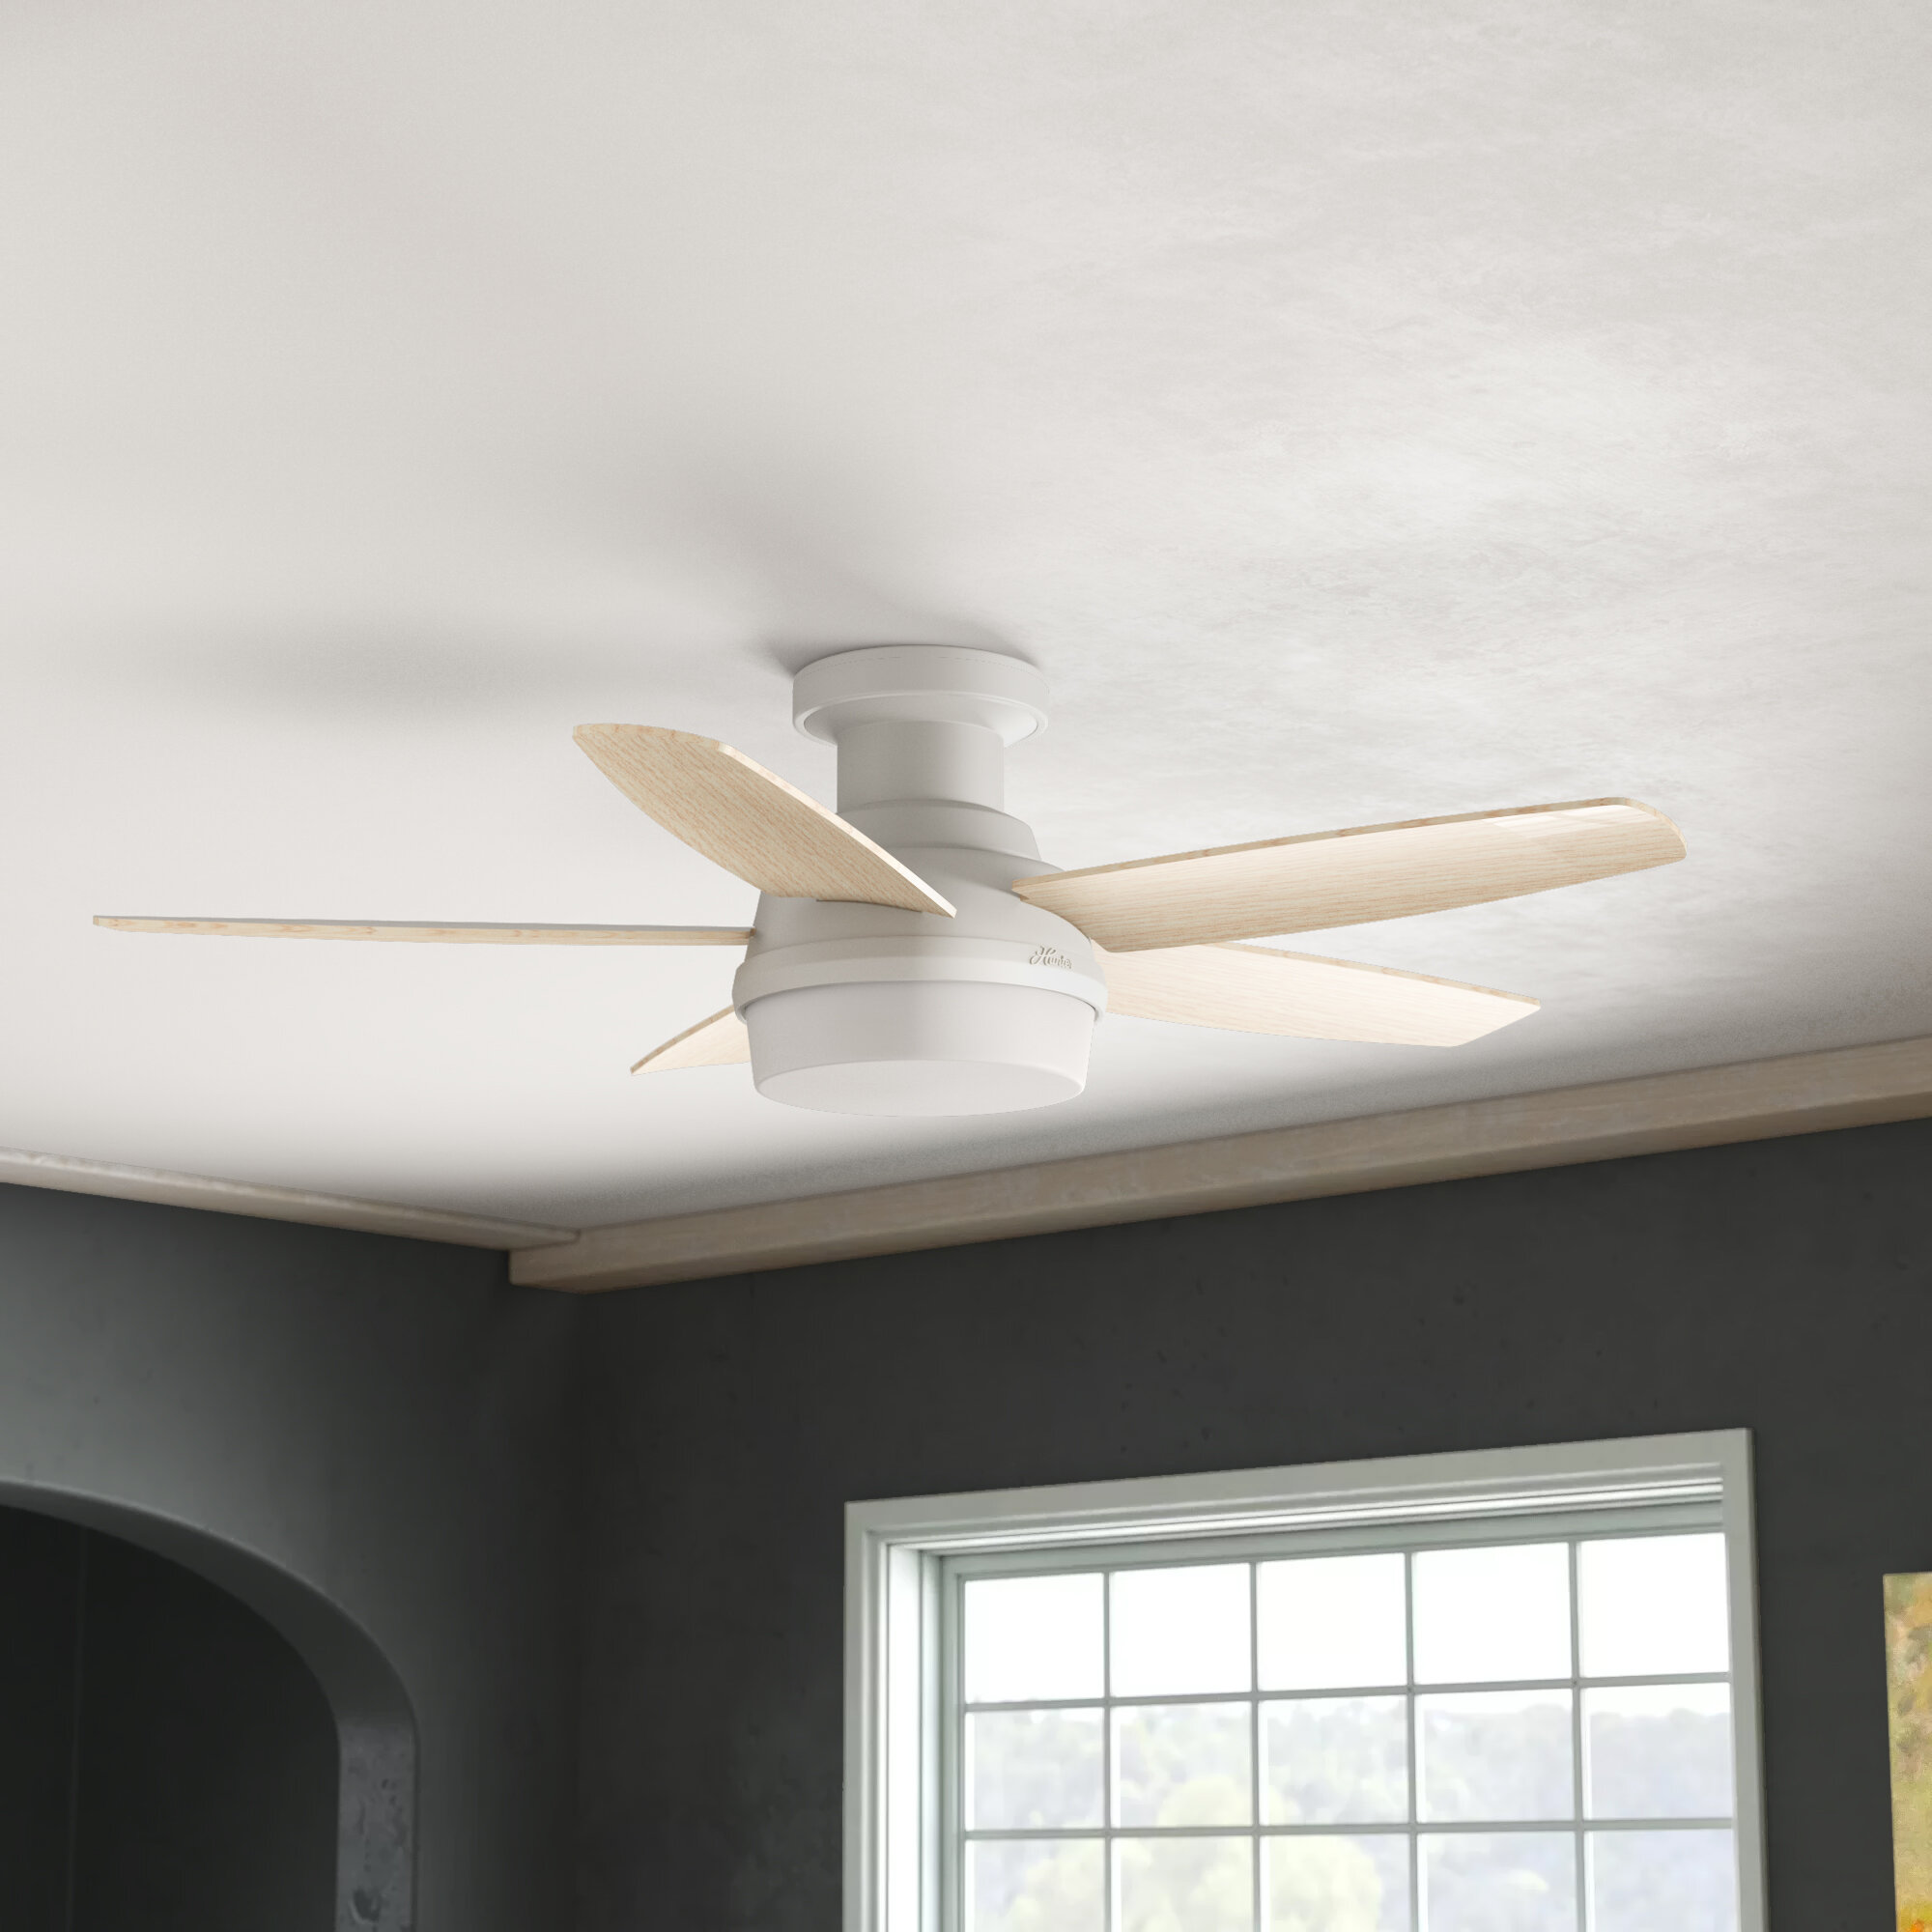 Hunter Fan 48 Avia 5 Blade Flush Mount Ceiling Fan With Remote Control And Light Kit Included Reviews Wayfair